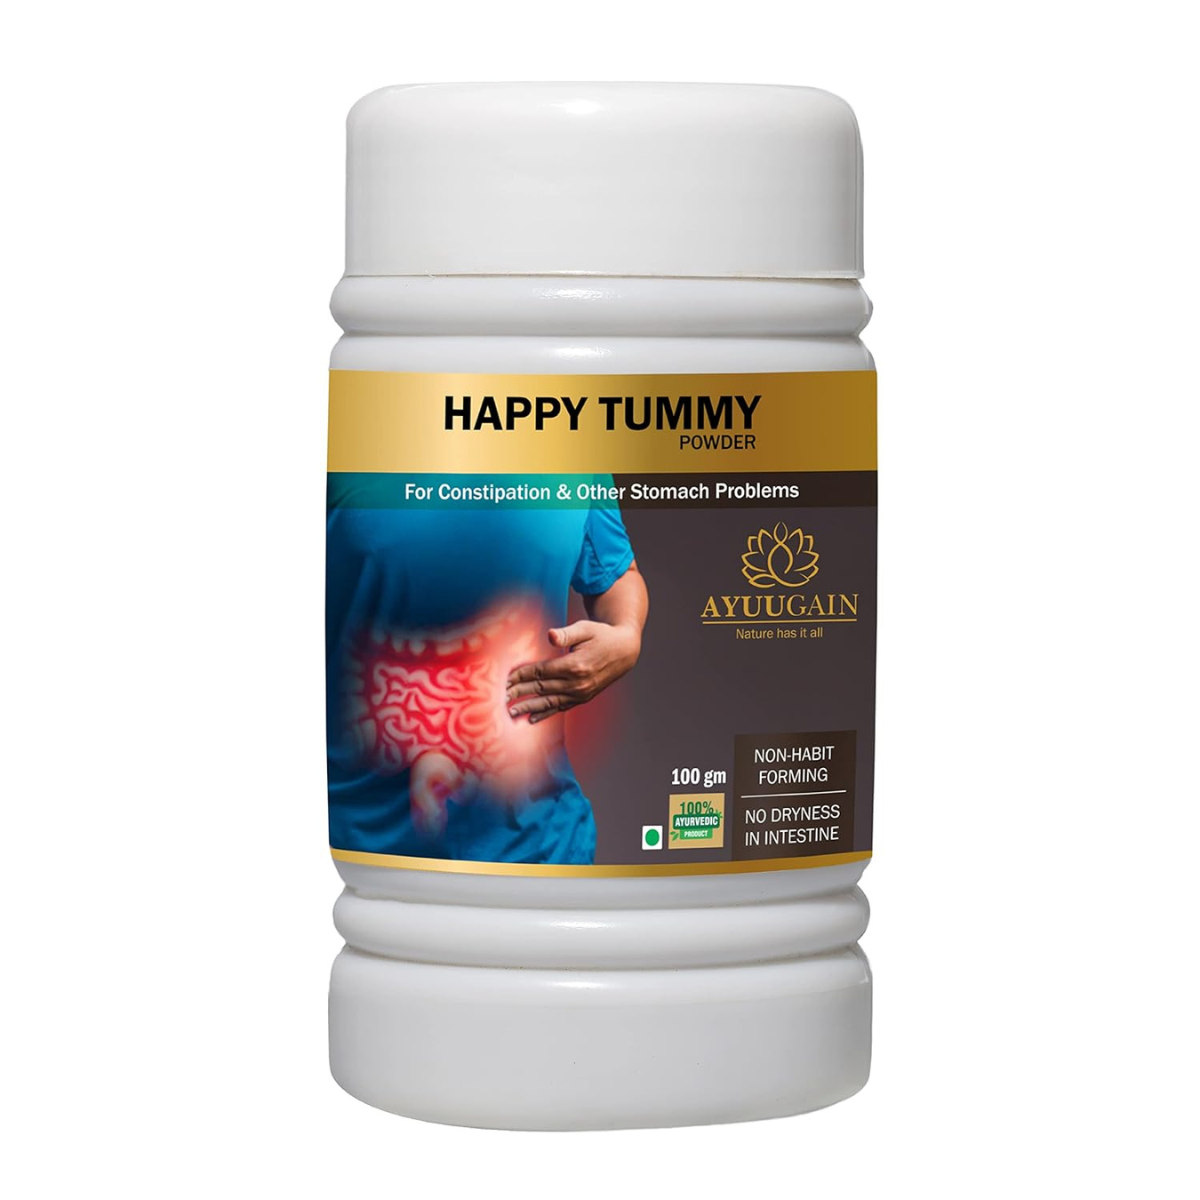 Happy Tummy Powder For constipation relief